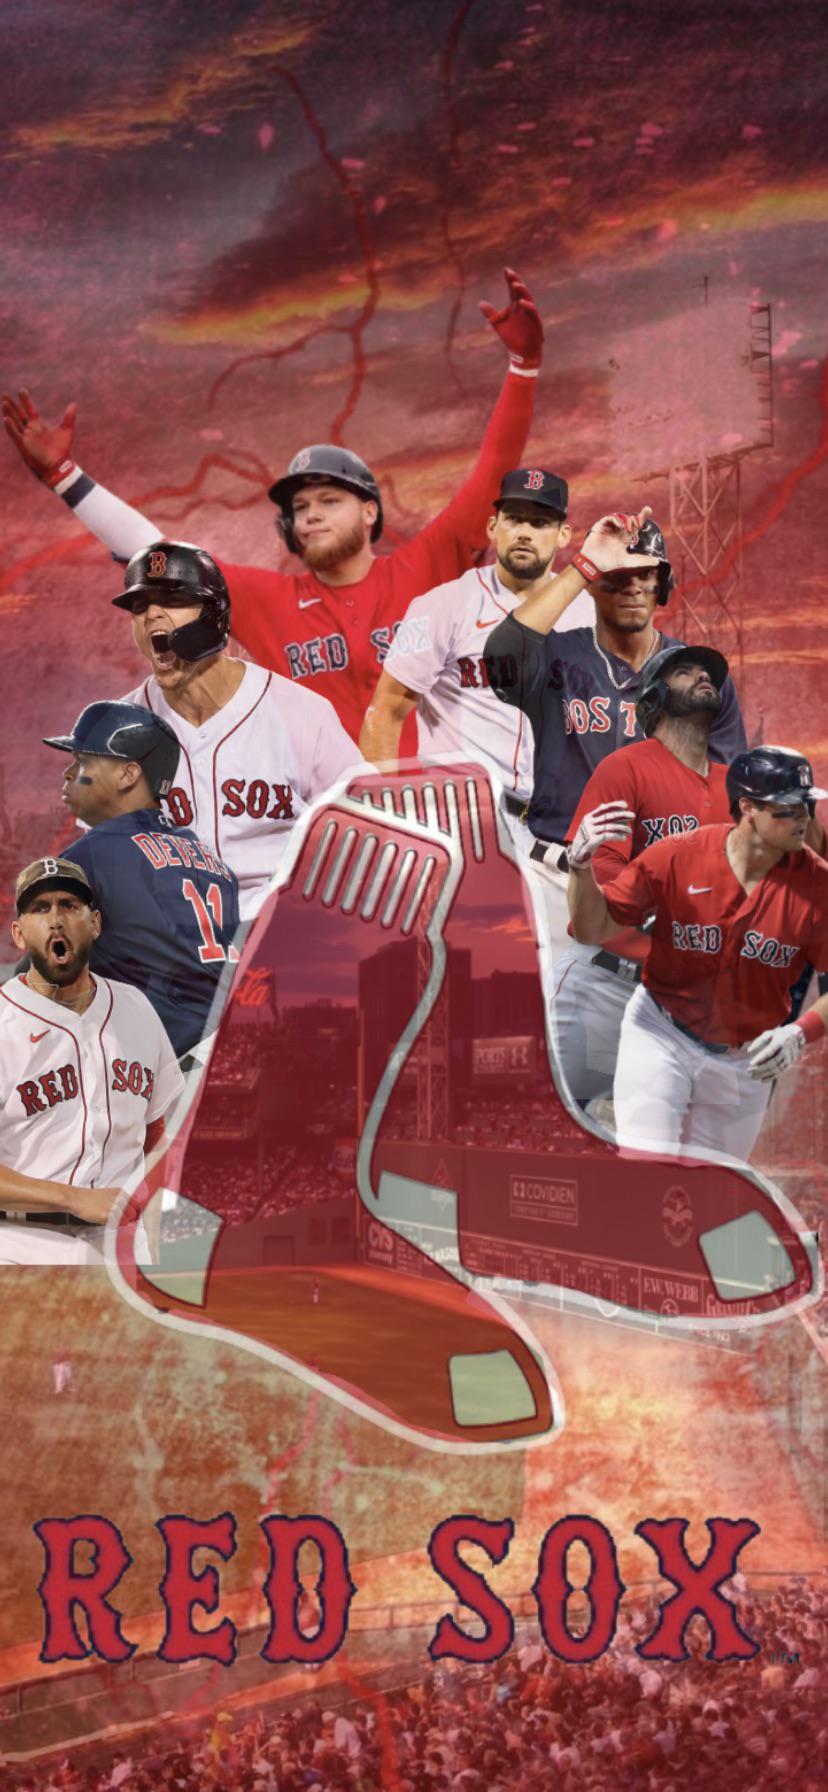 Red Sox on X: New deal, new wallpapers. #WallpaperWednesday https